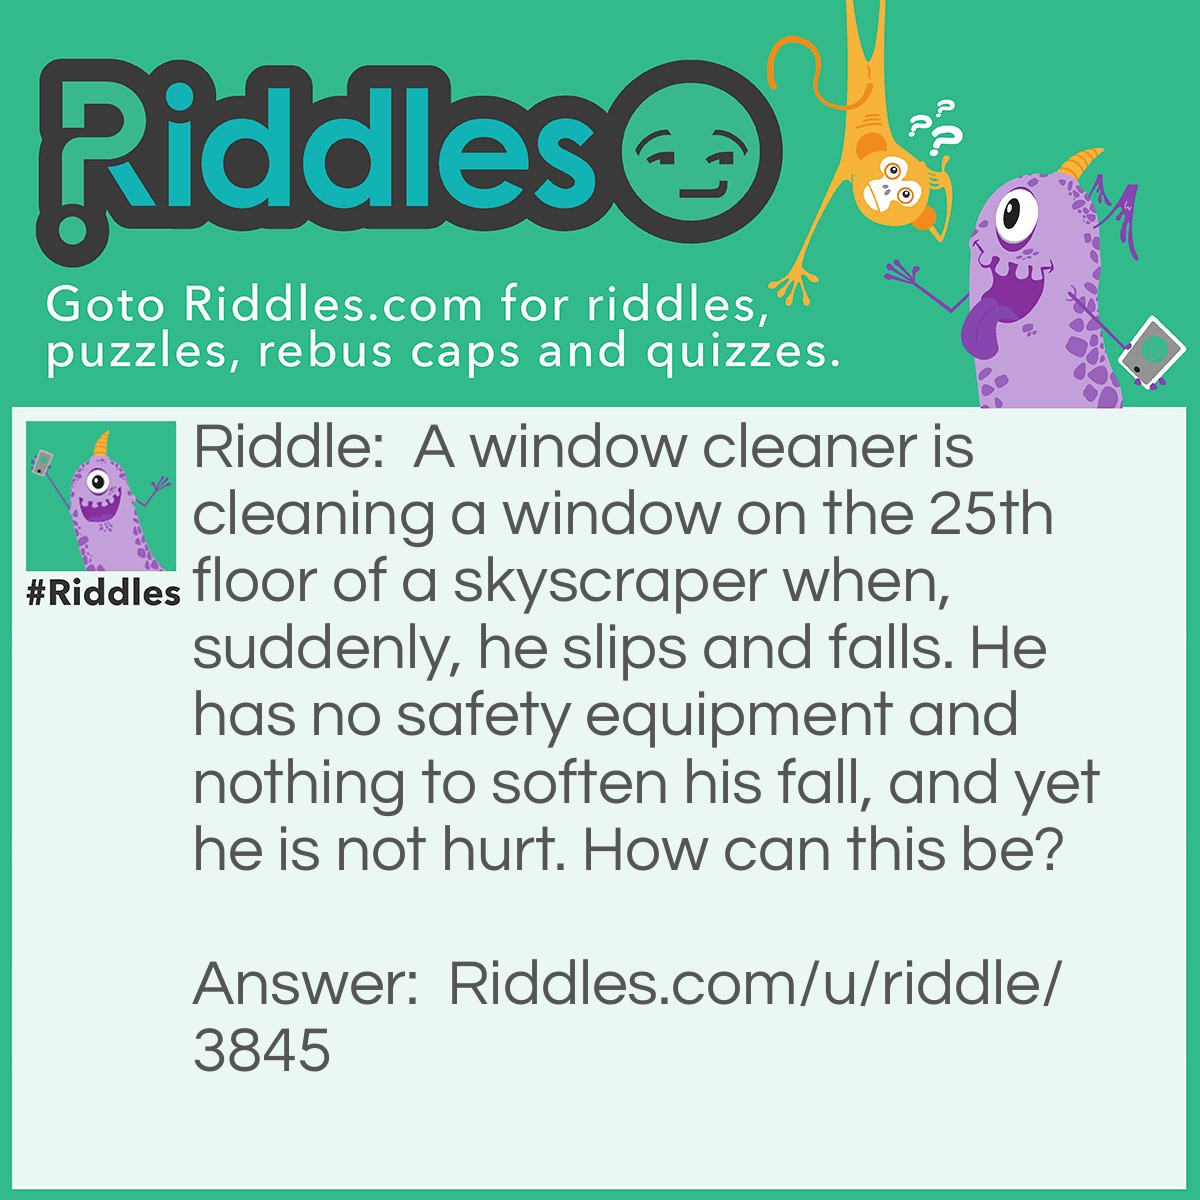 Riddle: A window cleaner is cleaning a window on the 25th floor of a skyscraper when, suddenly, he slips and falls. He has no safety equipment and nothing to soften his fall, and yet he is not hurt. How can this be? Answer: He was inside cleaning windows.